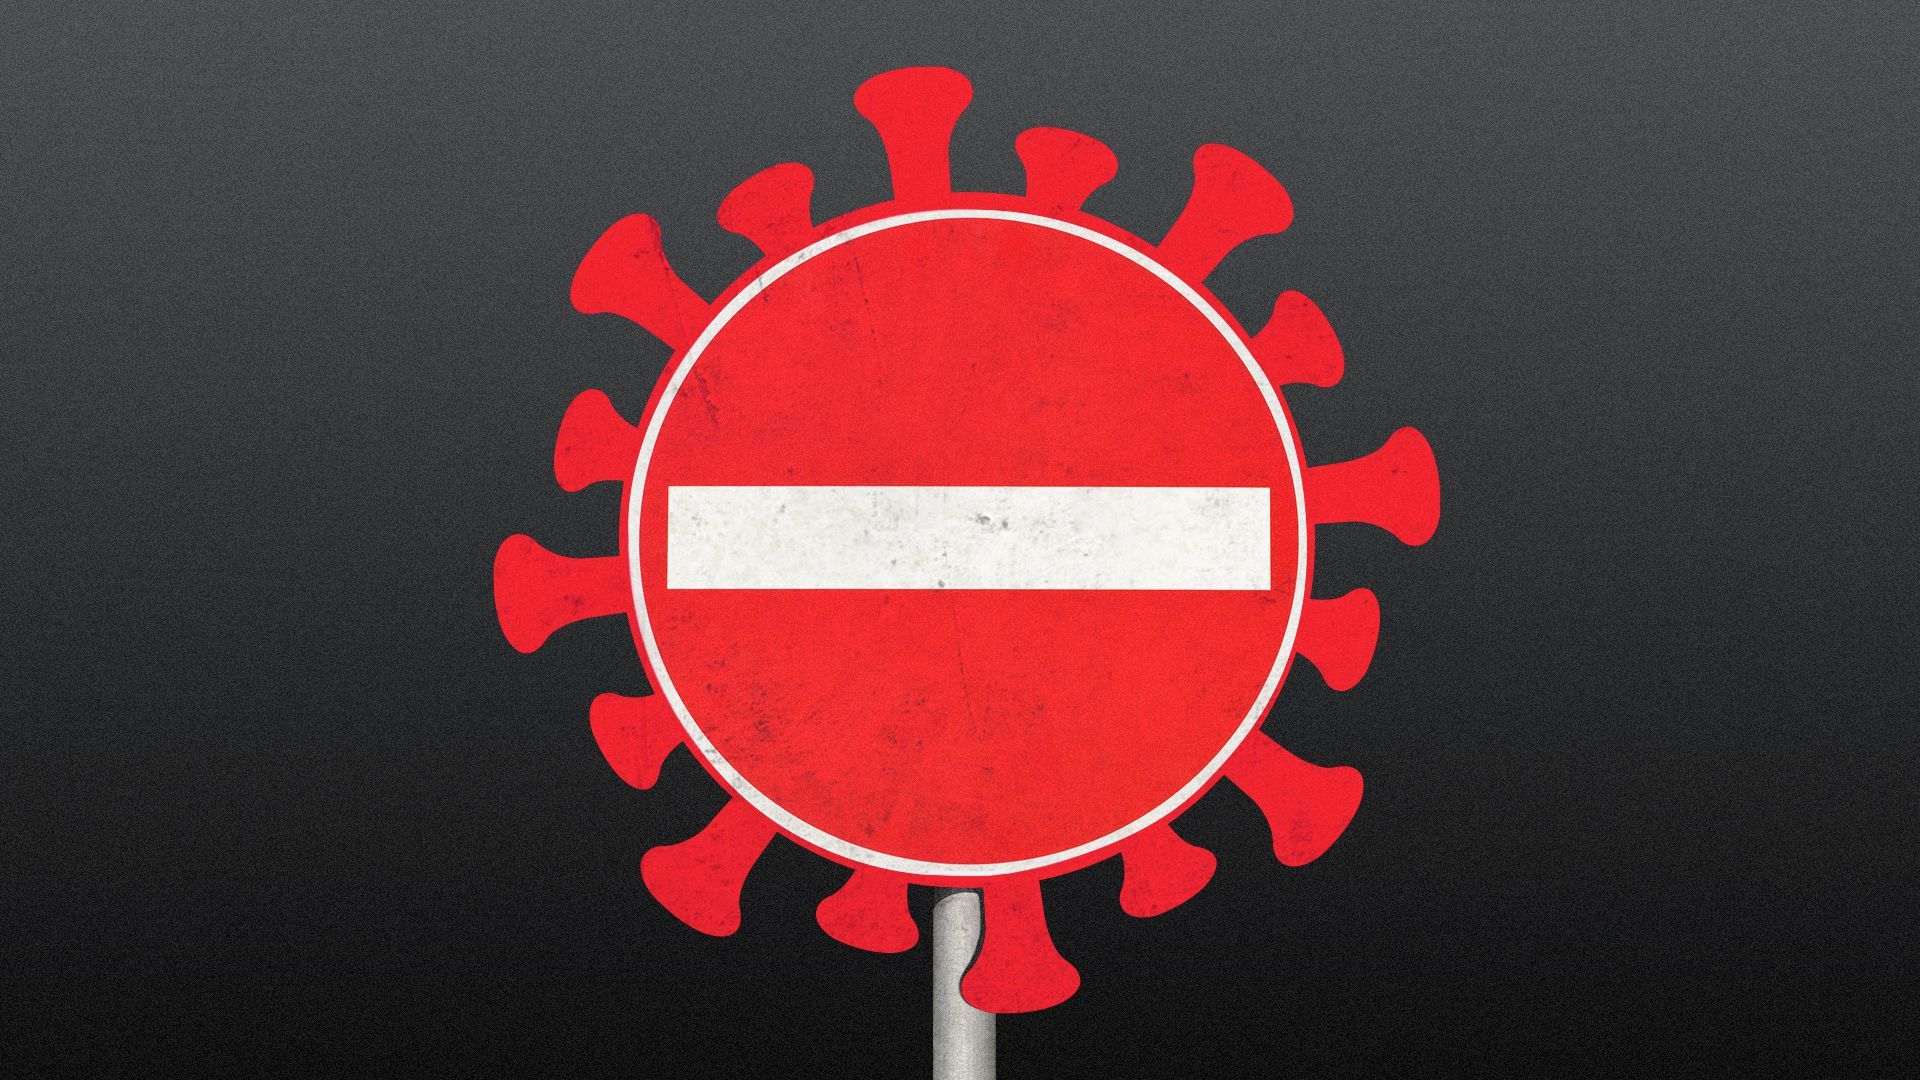 Illustration of a no entry sign shaped as a coronavirus cell.